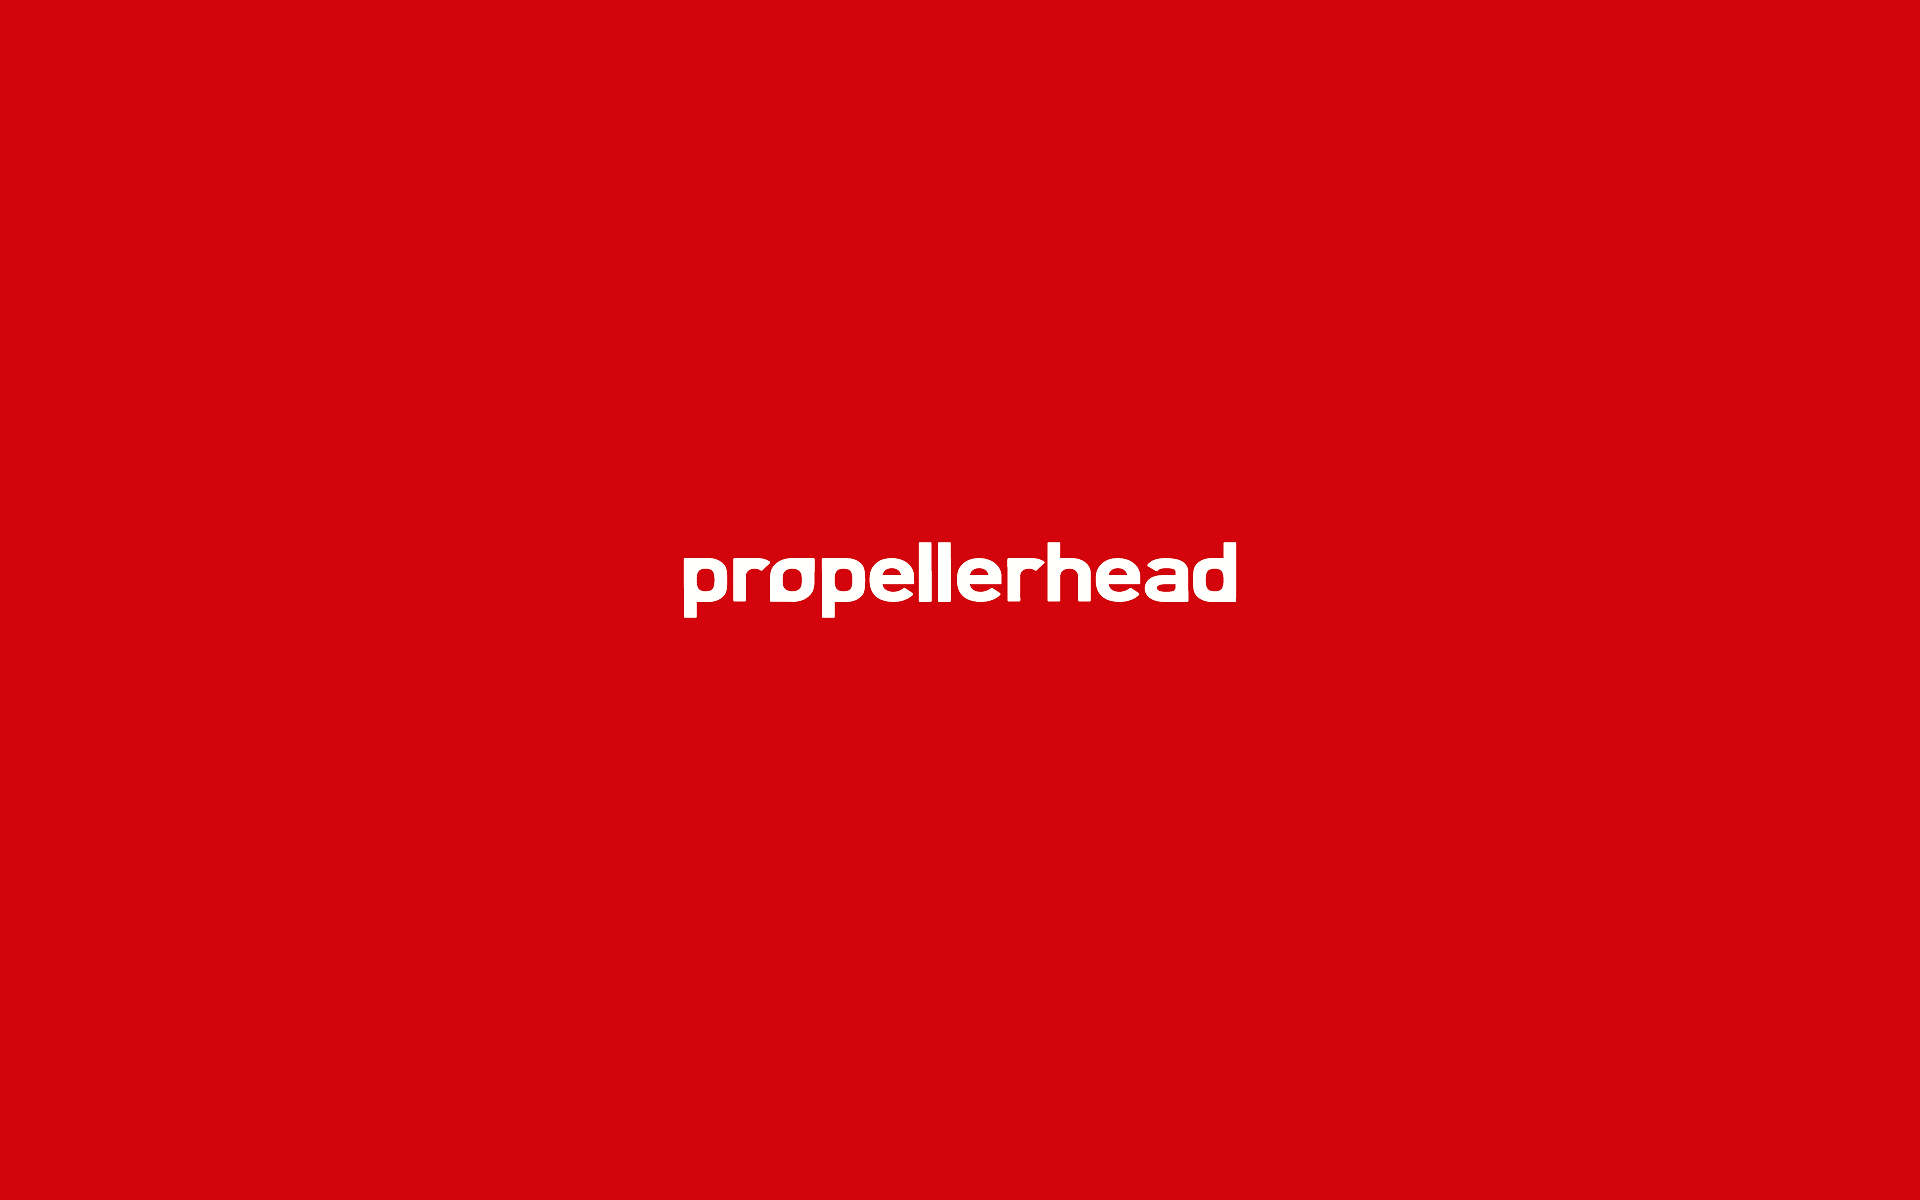 If You Are A Propellerhead Software Fan This Wallpaper Is For